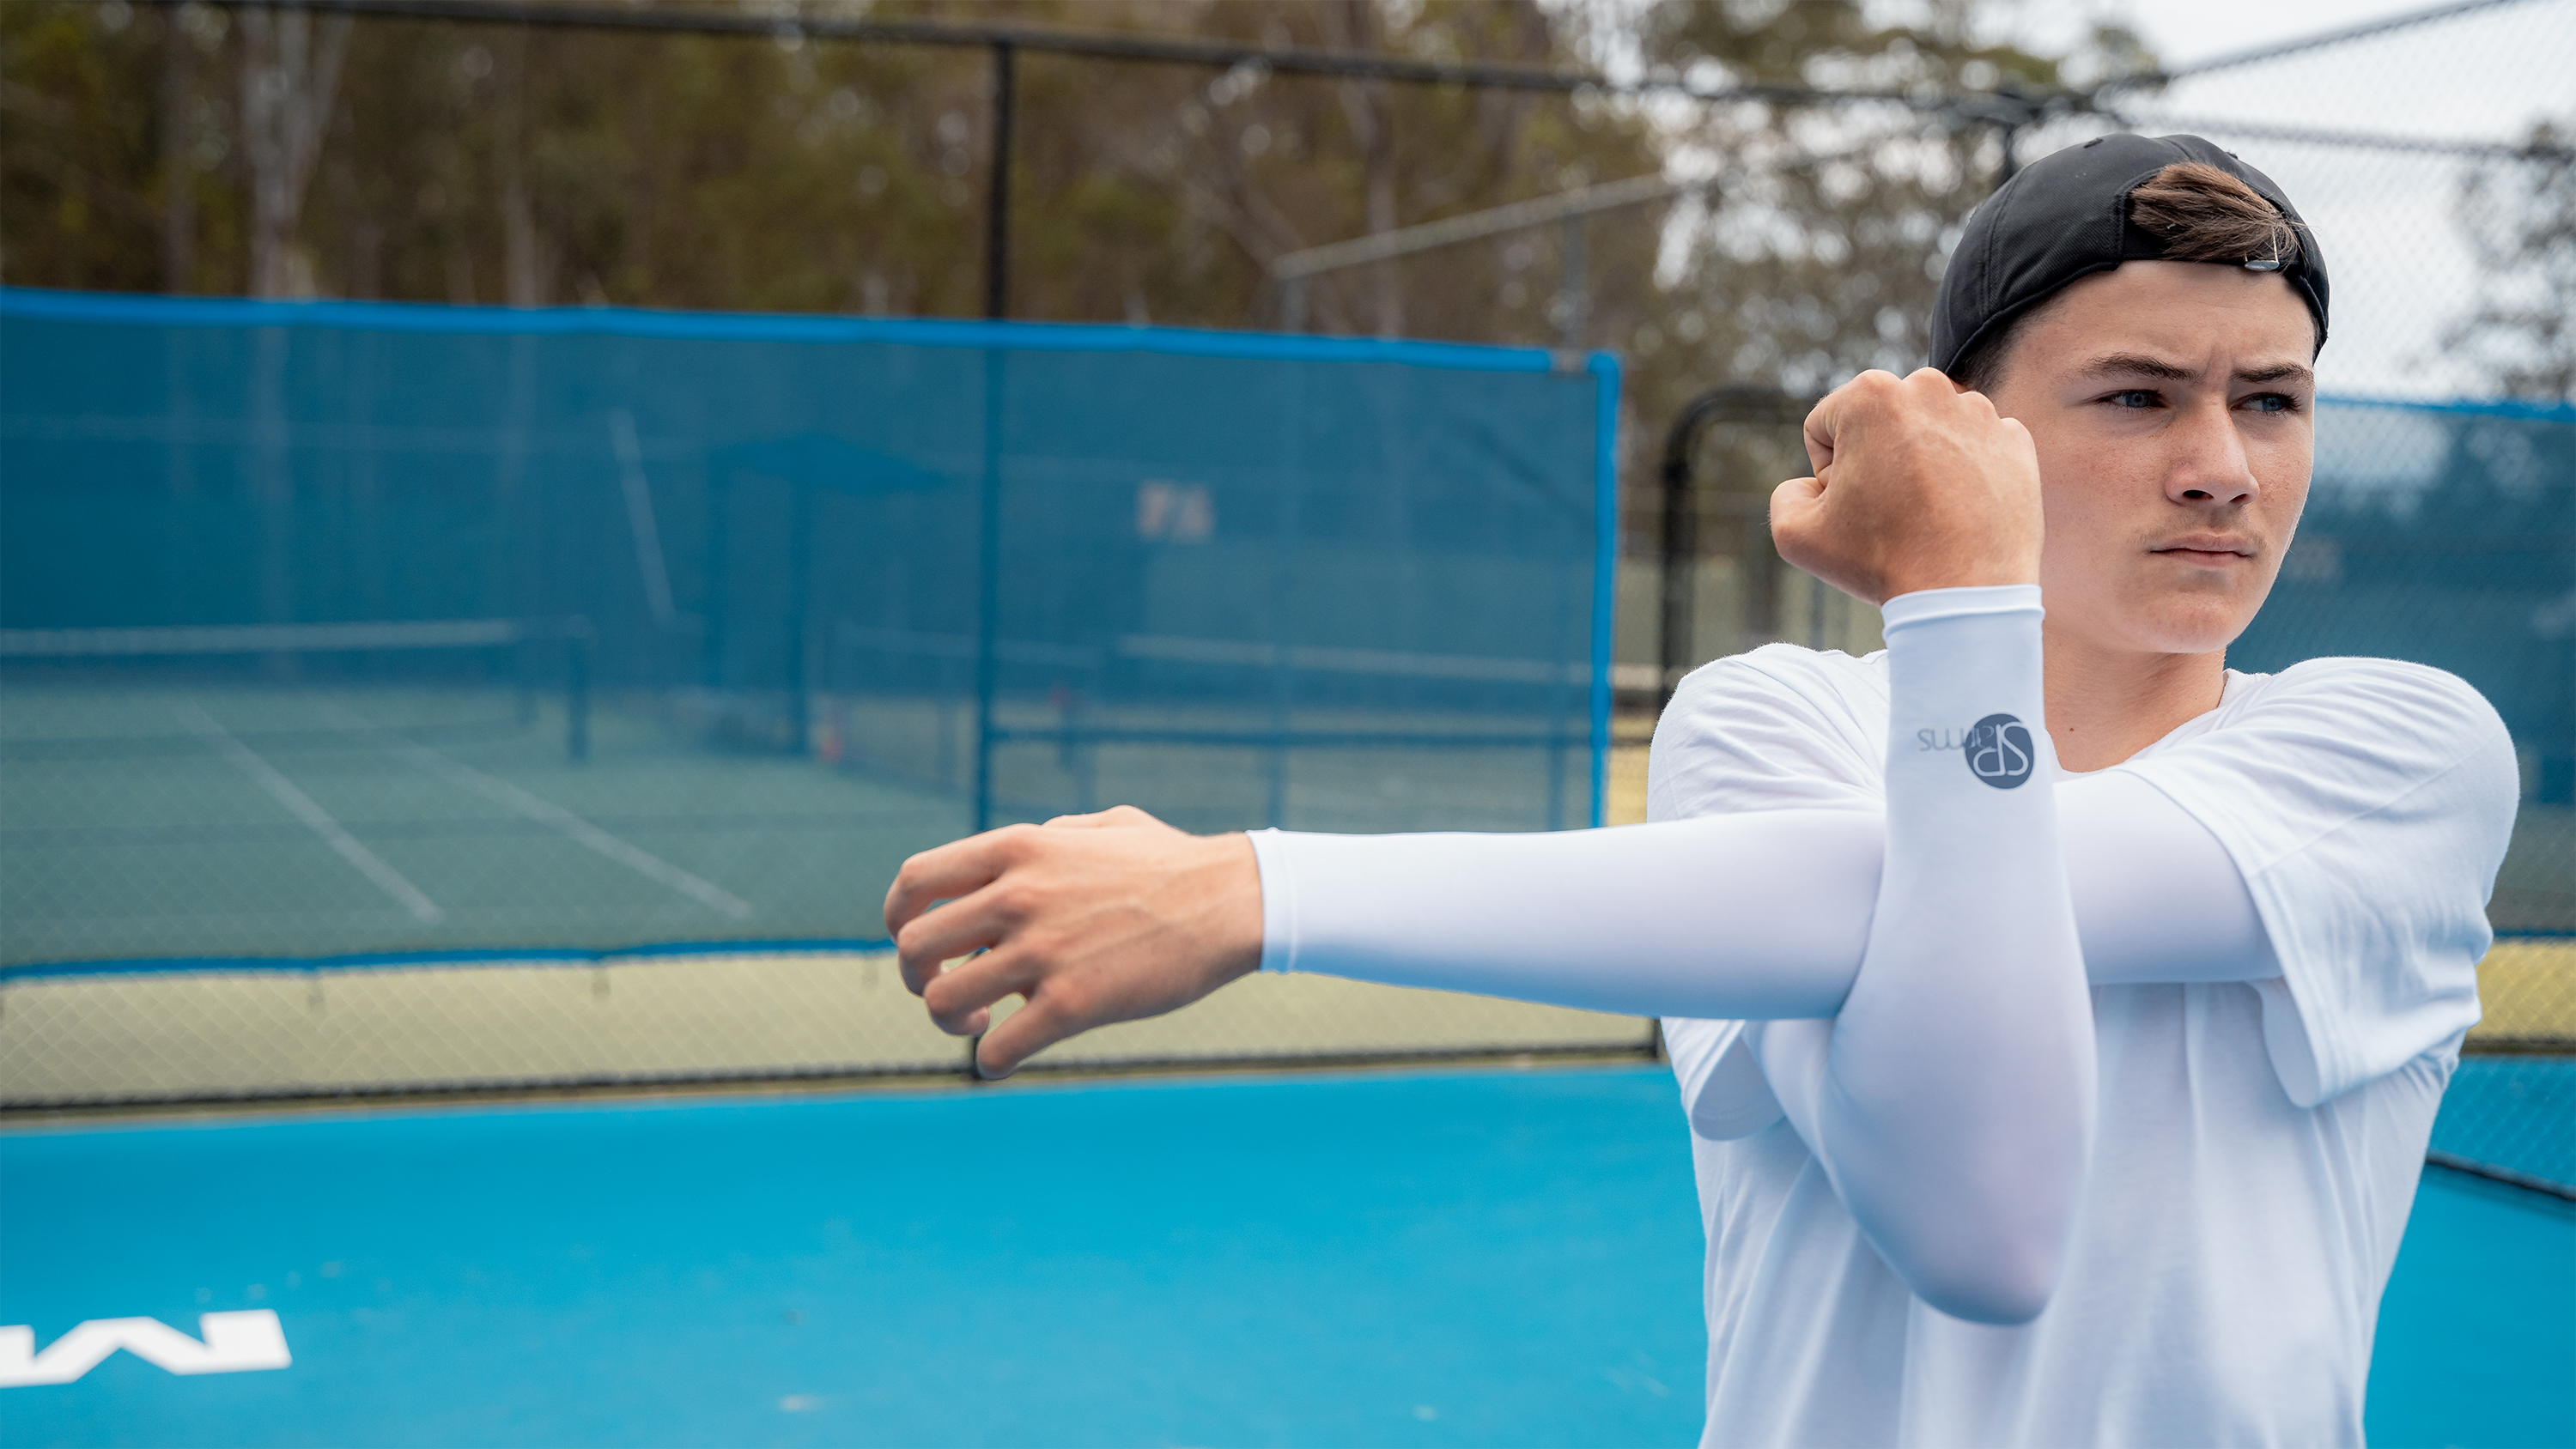 Image of a tennis player wearing SParms sun sleeves.